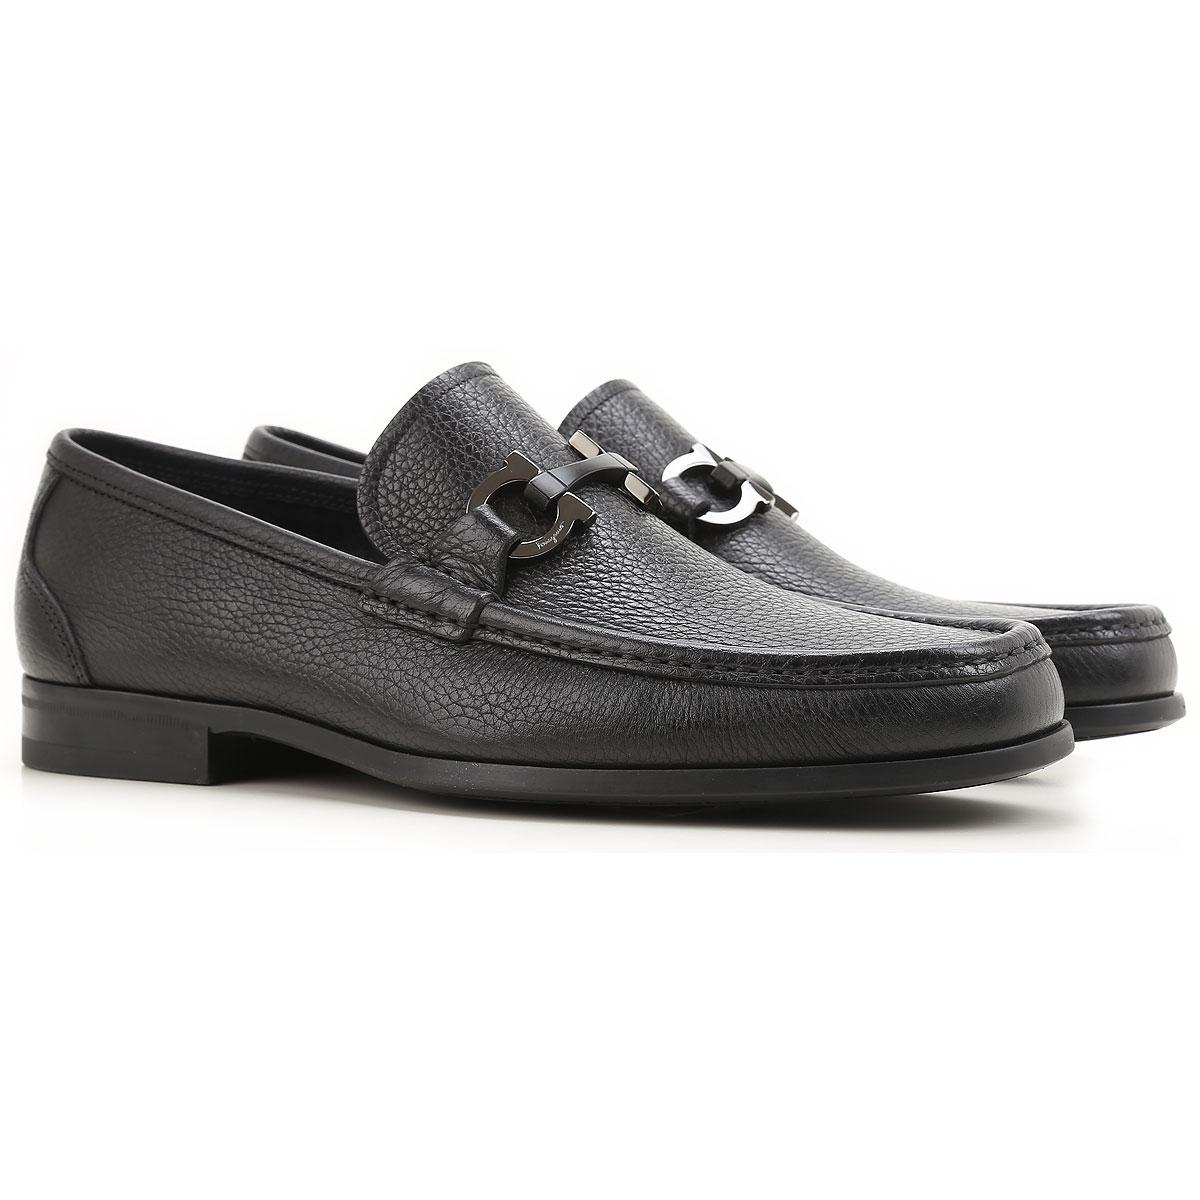 Mens Loafers For Sale | IQS Executive